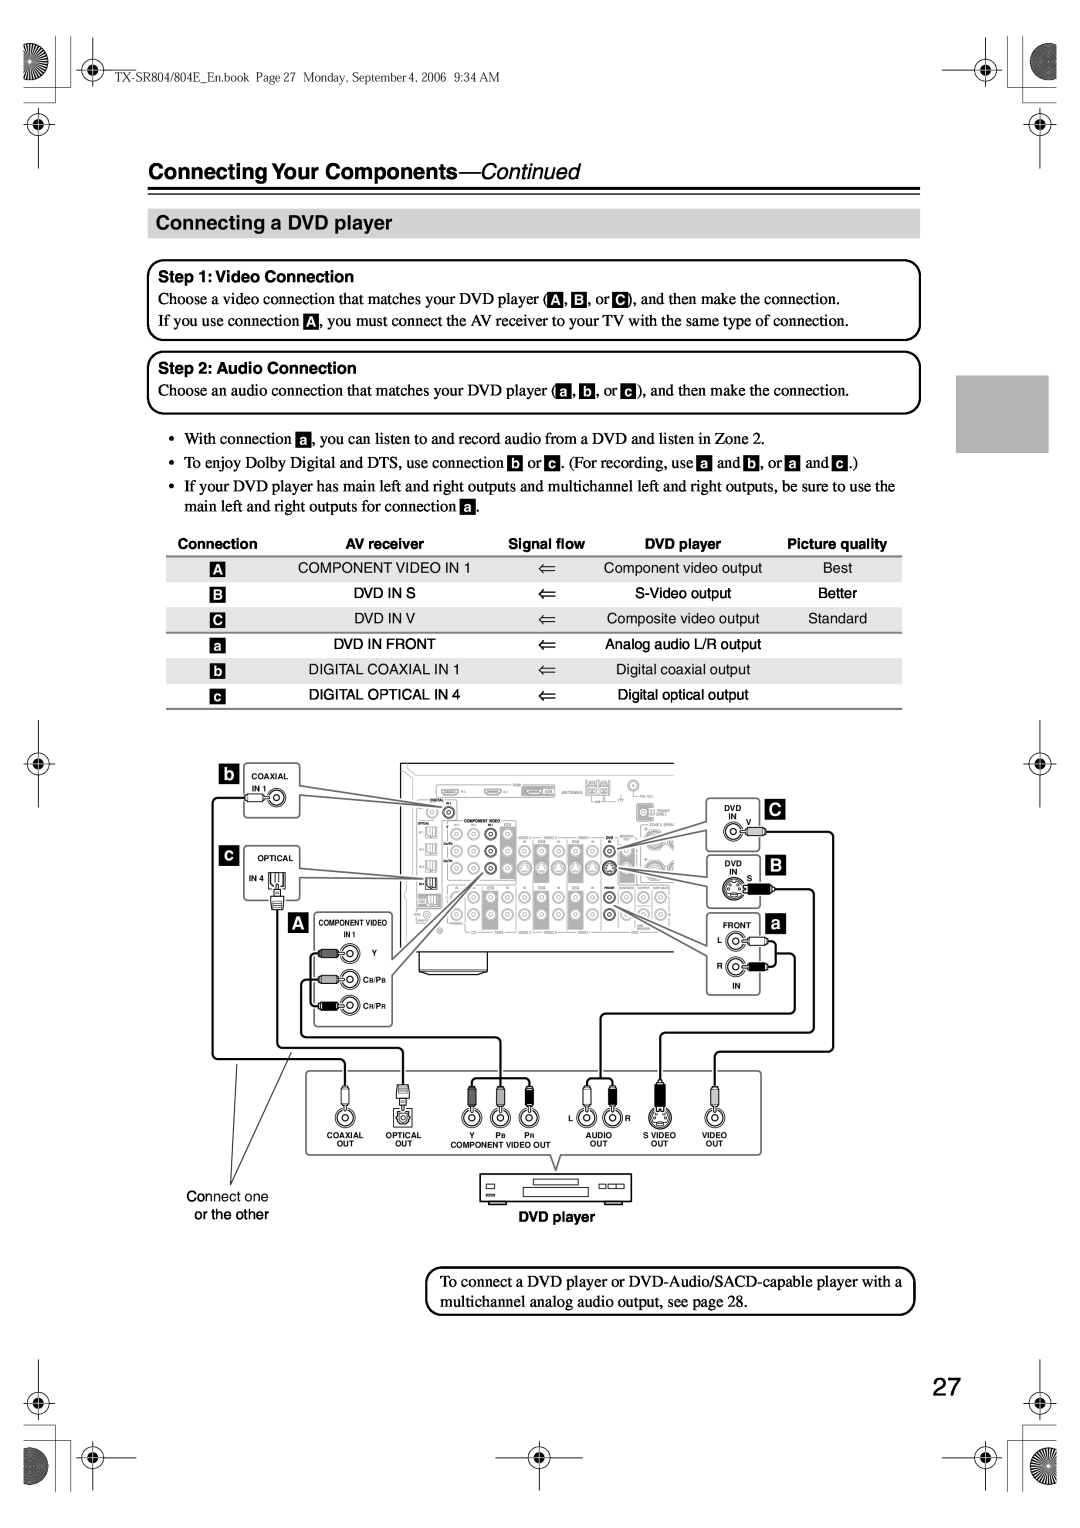 Onkyo TX-SR804E instruction manual Connecting a DVD player, Connecting Your Components—Continued, C B a, or the other 